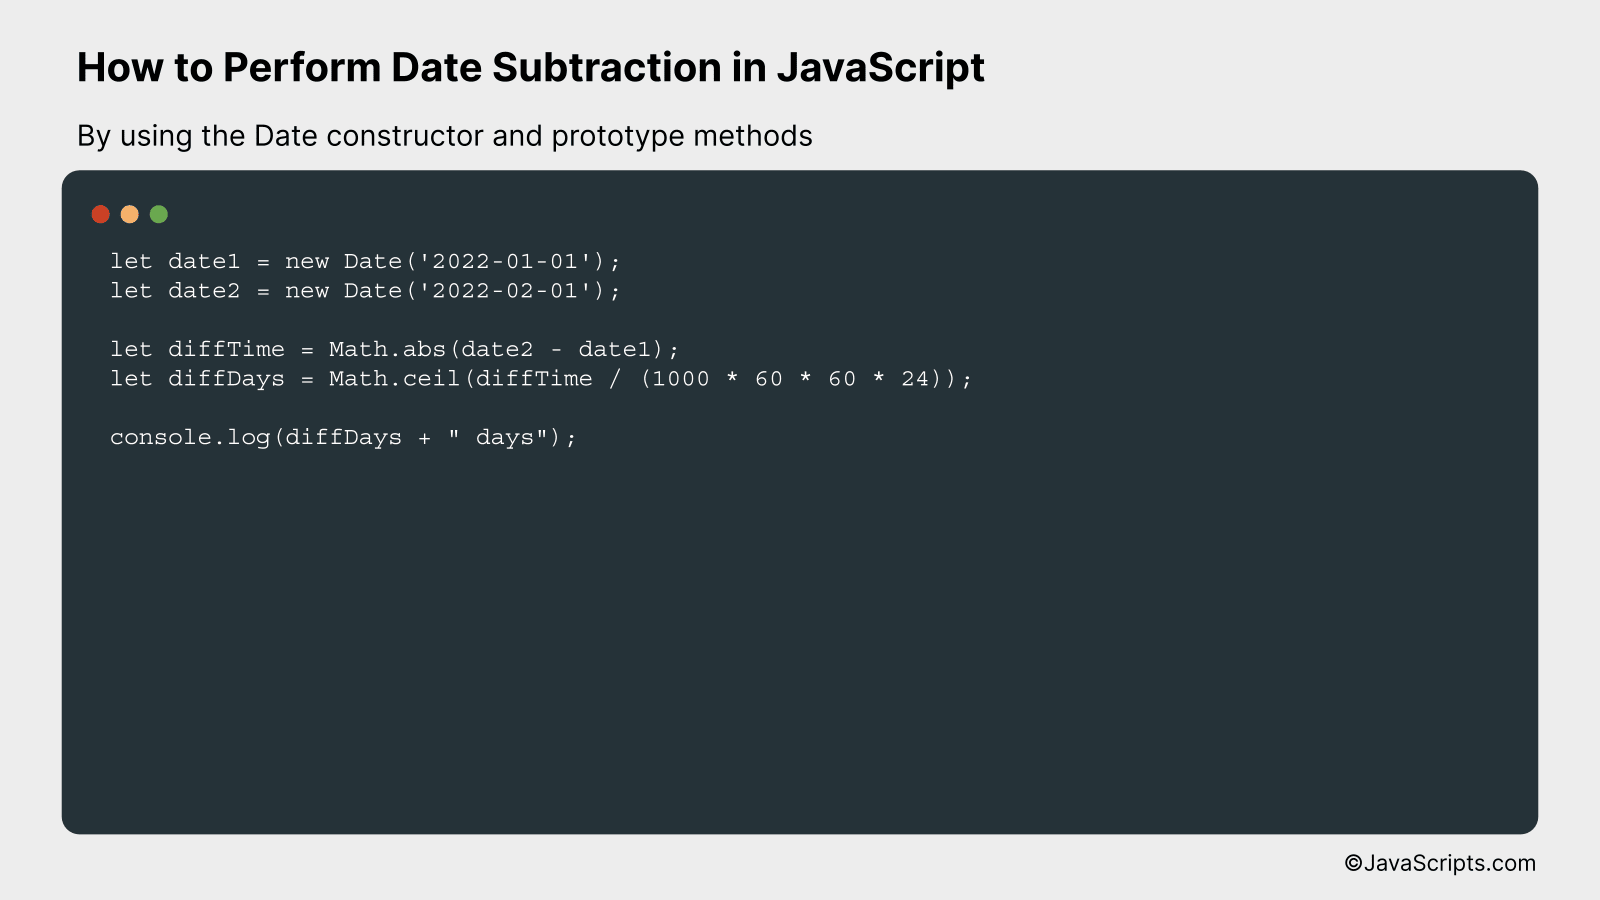 By using the Date constructor and prototype methods